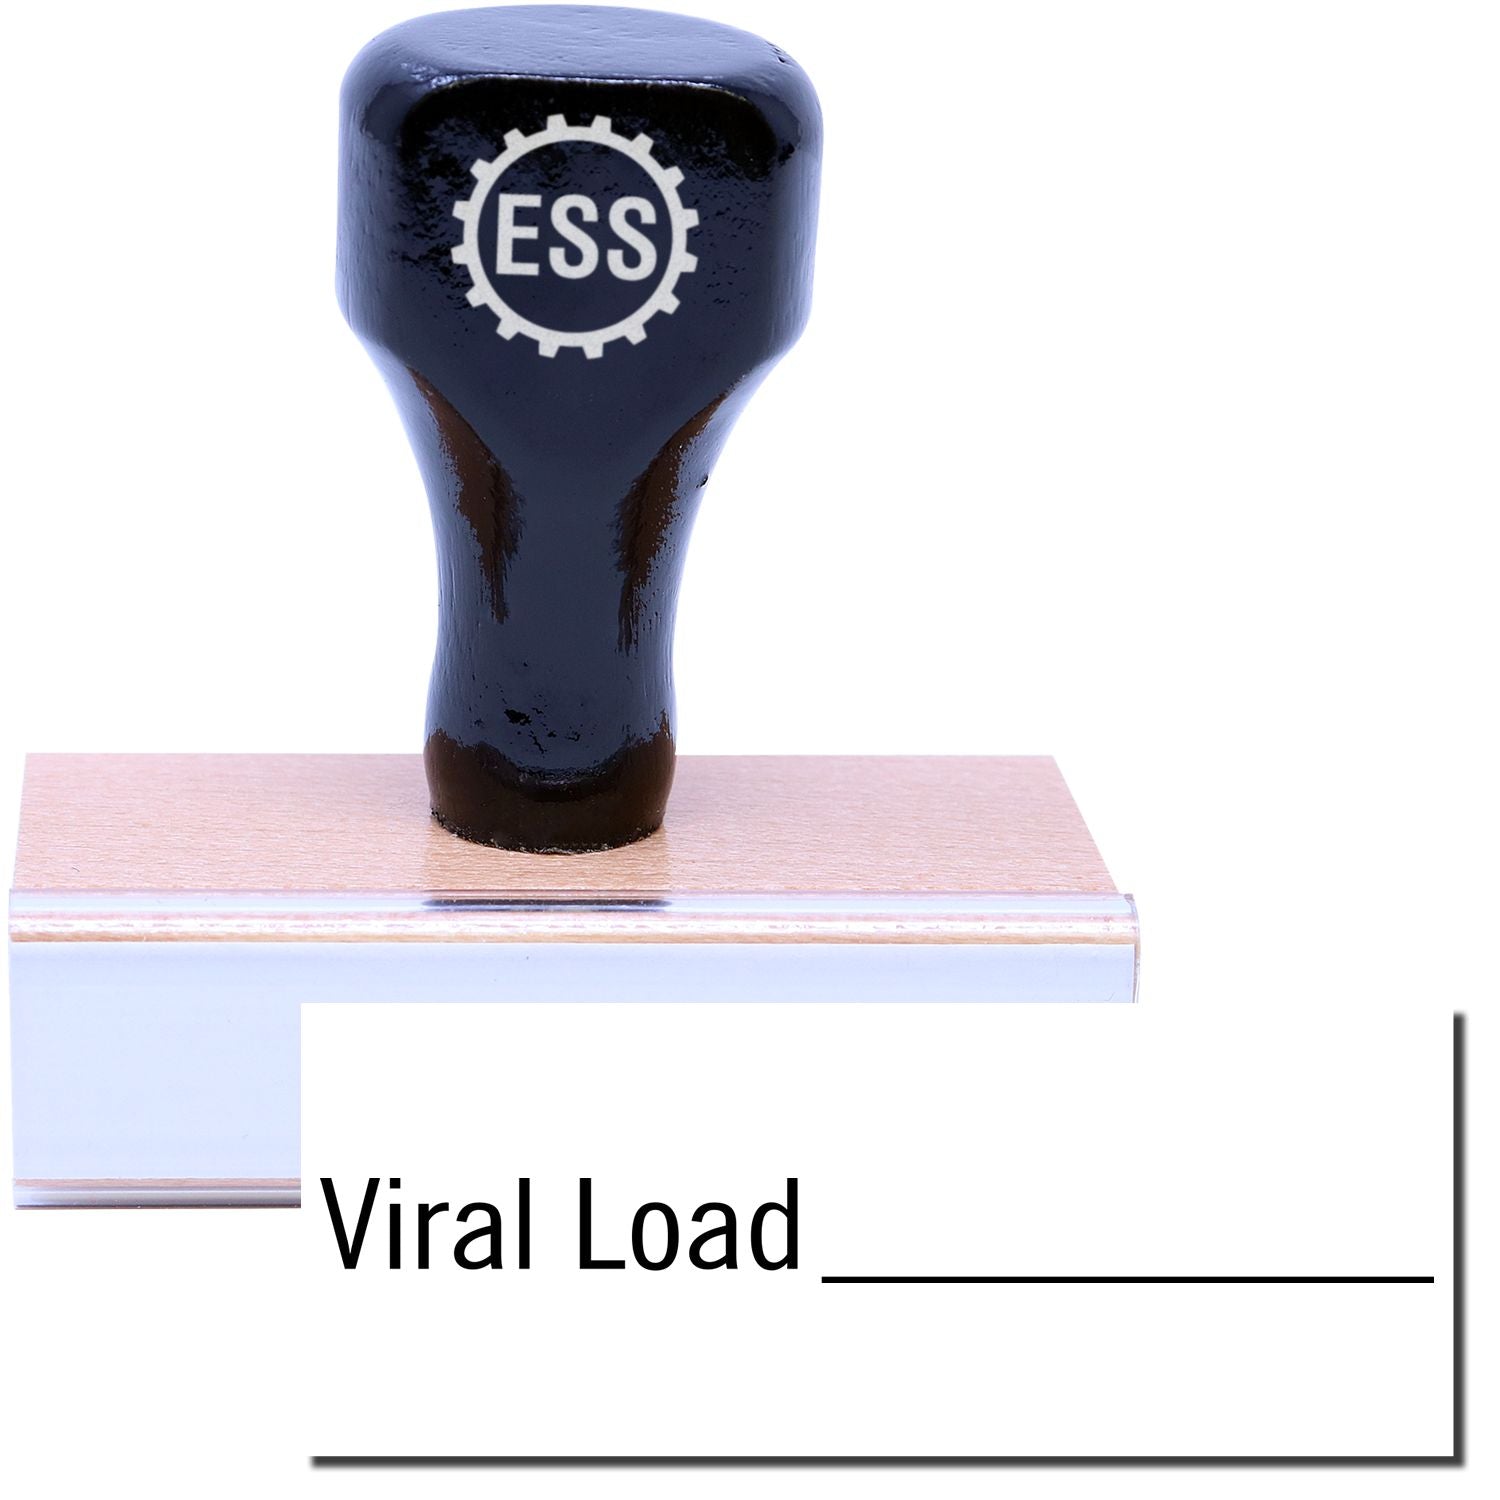 A stock office rubber stamp with a stamped image showing how the text "Viral Load" with a line is displayed after stamping.